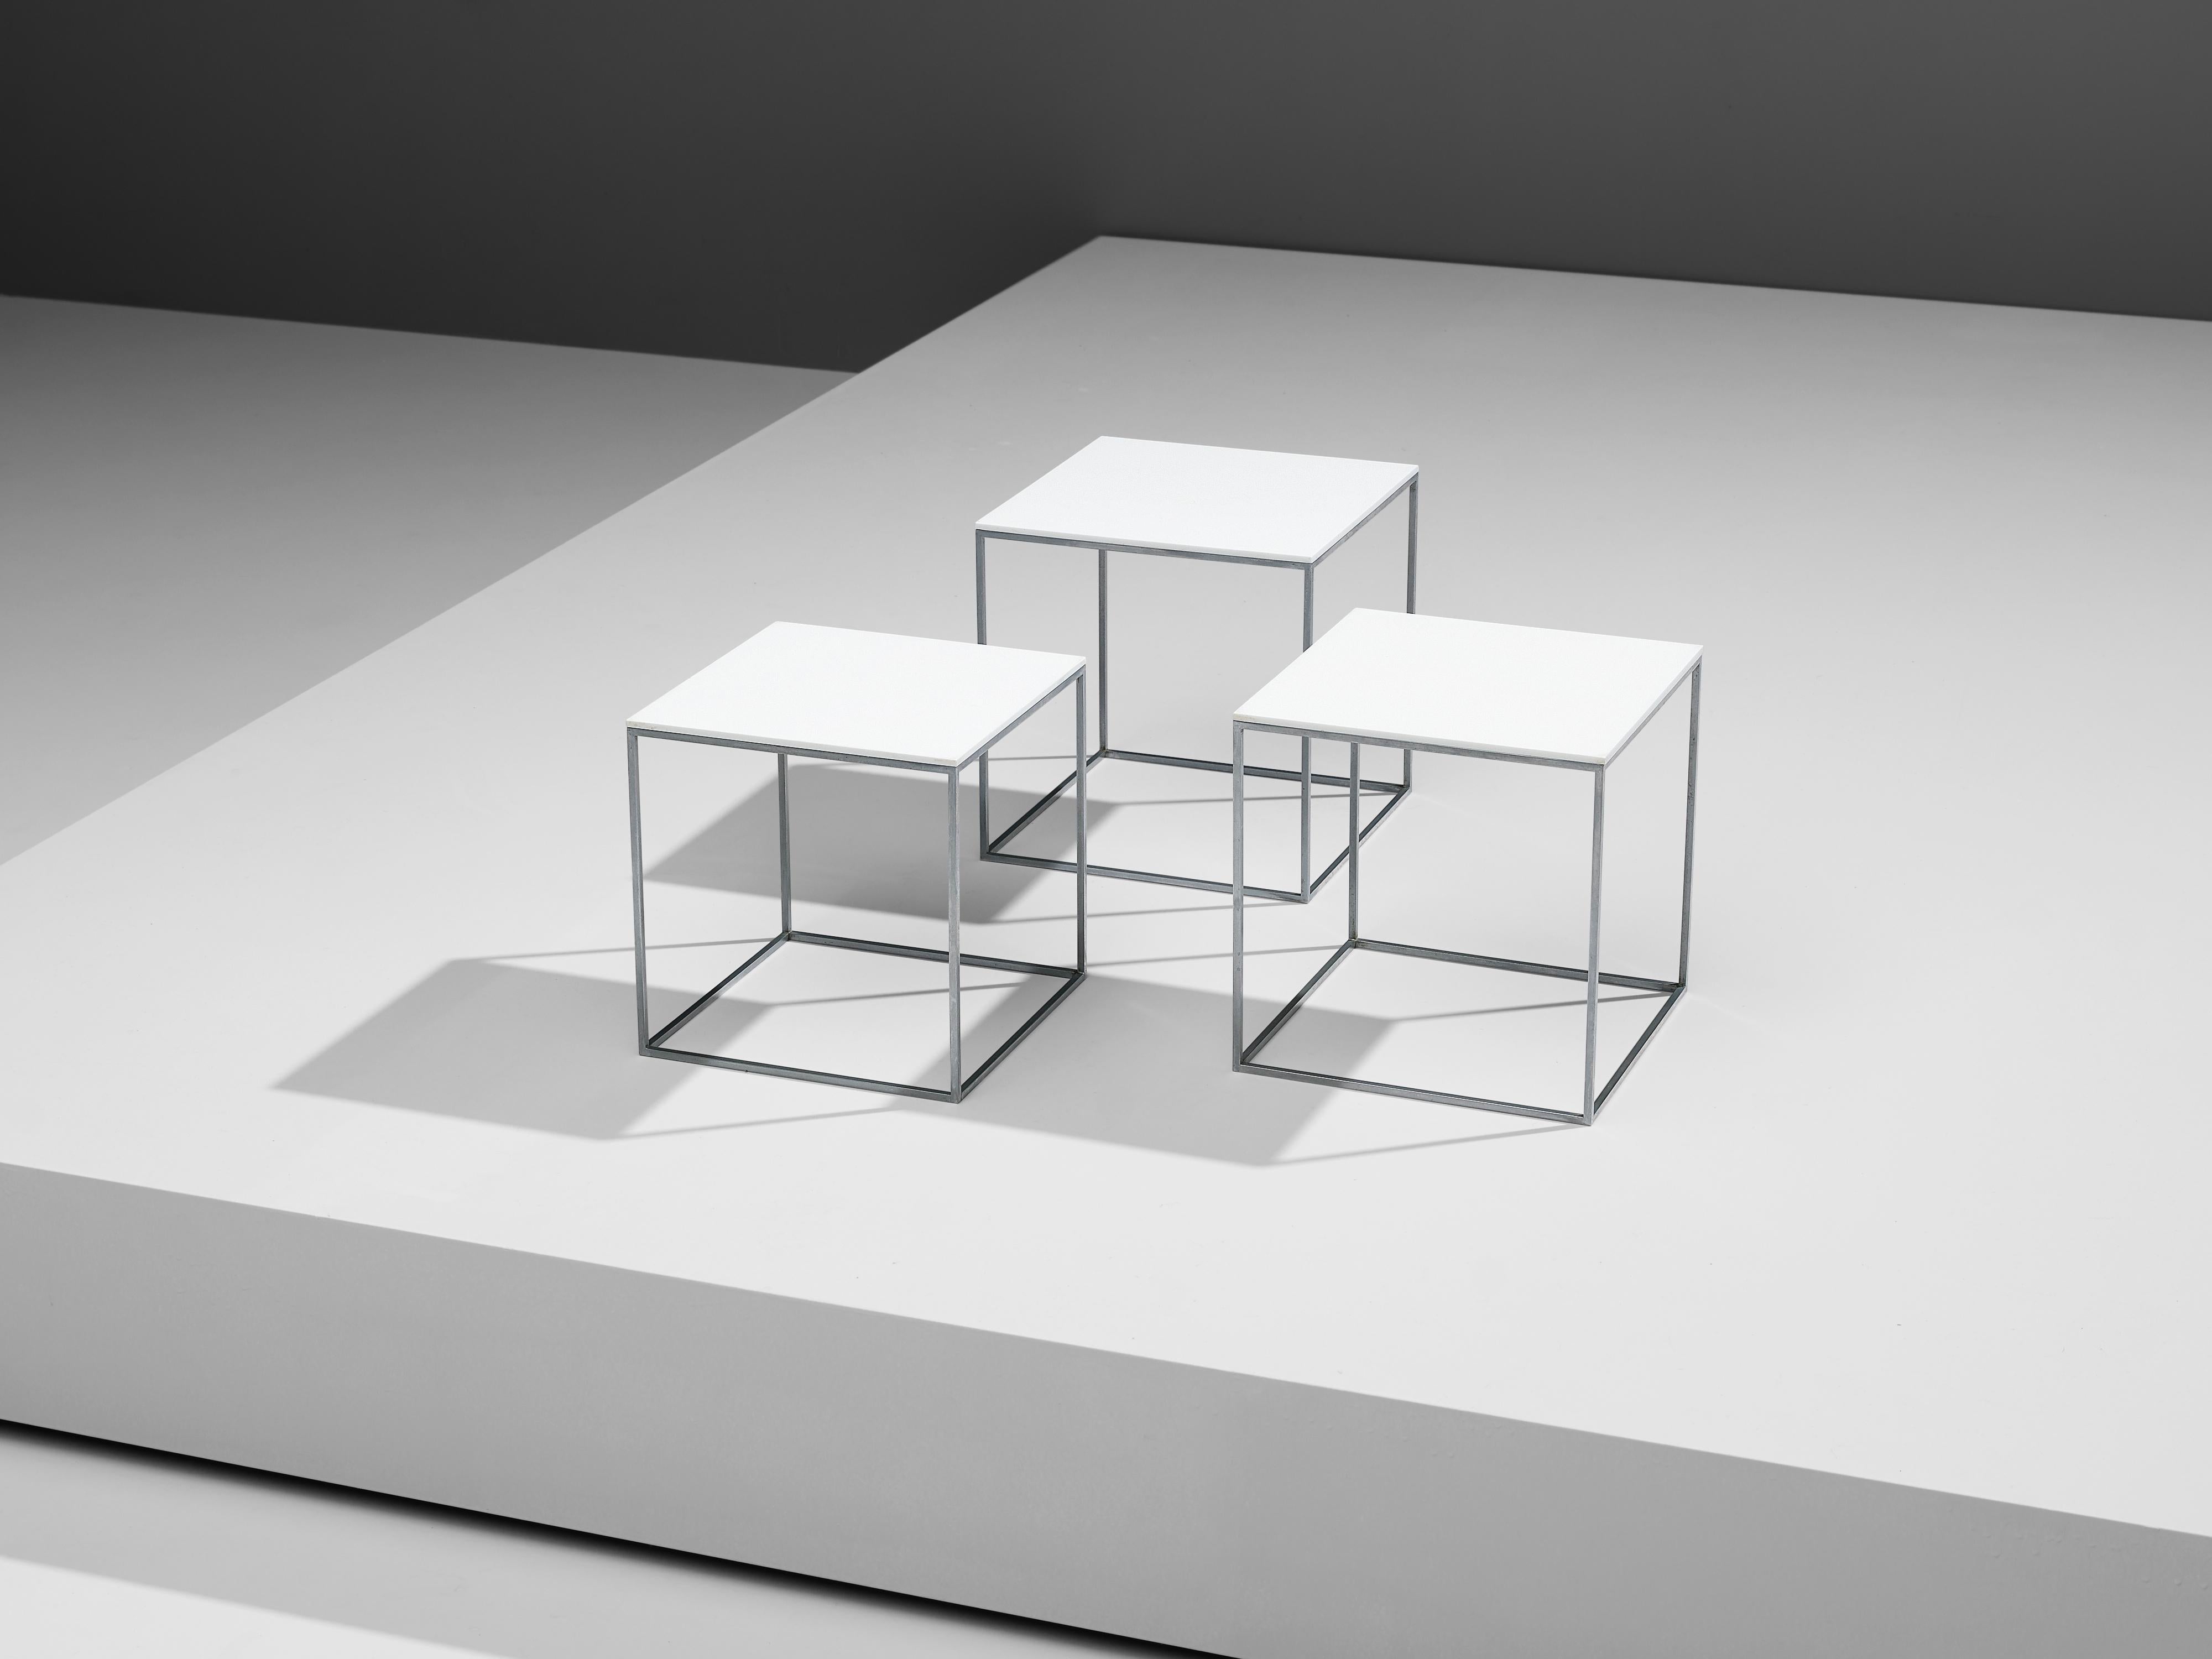 Poul Kjaerholm for E. Kold Christensen, set of 'PK17' nesting tables, perspex acrylic, steel, Denmark, 1957

These modernist Danish nesting tables by Poul Kjaerholm were manufactured in Denmark by E. Kold Christensen. They feature an open chrome